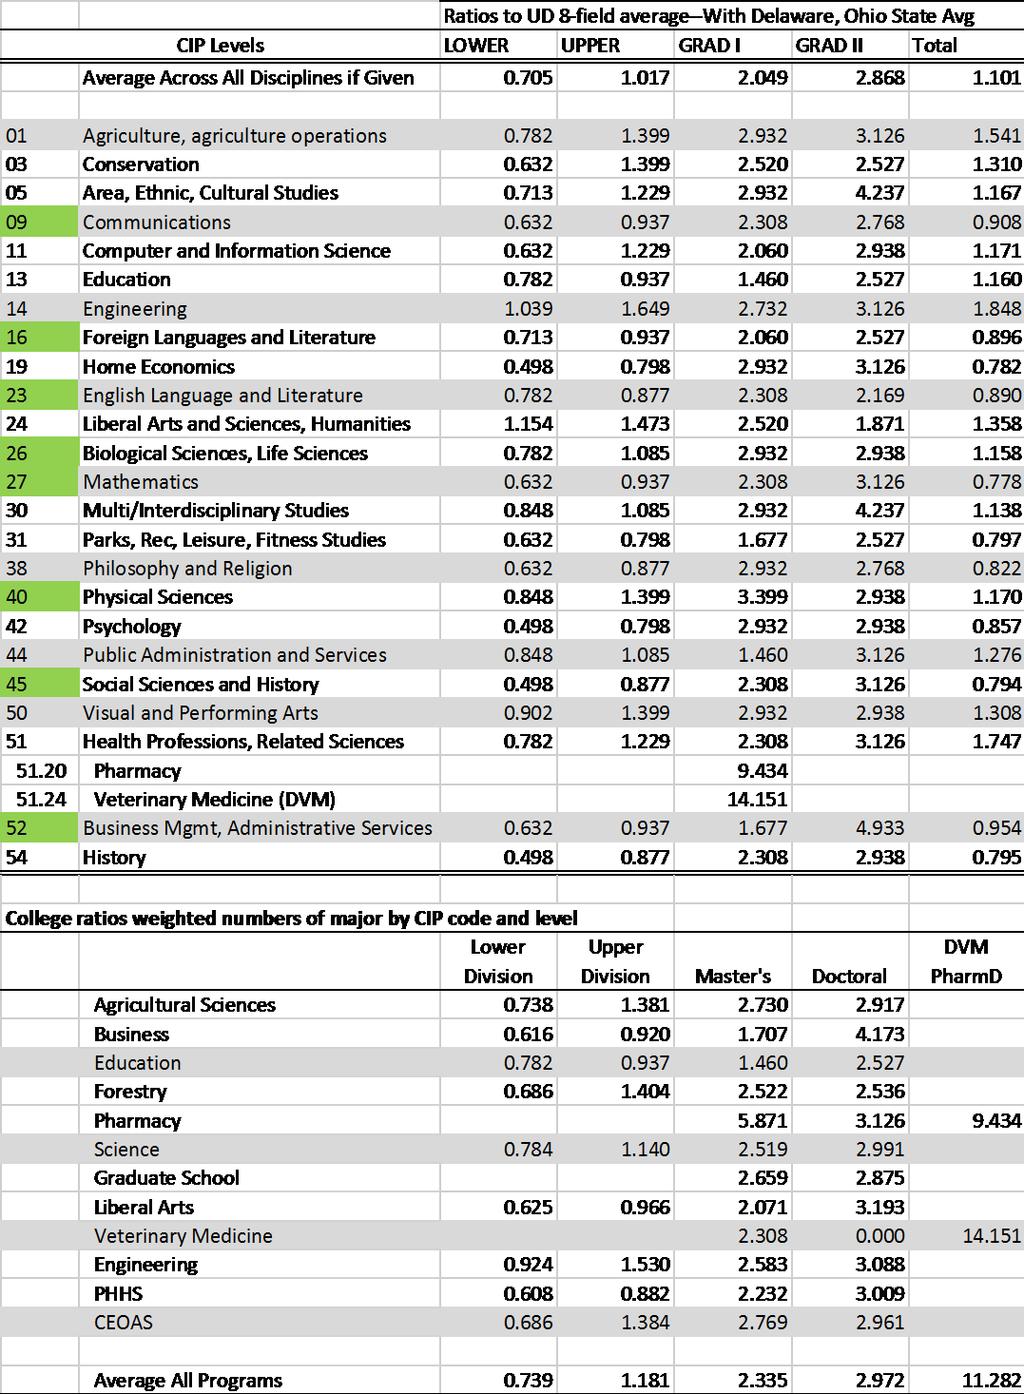 Table 5: Weights by discipline and level used in the budget model.